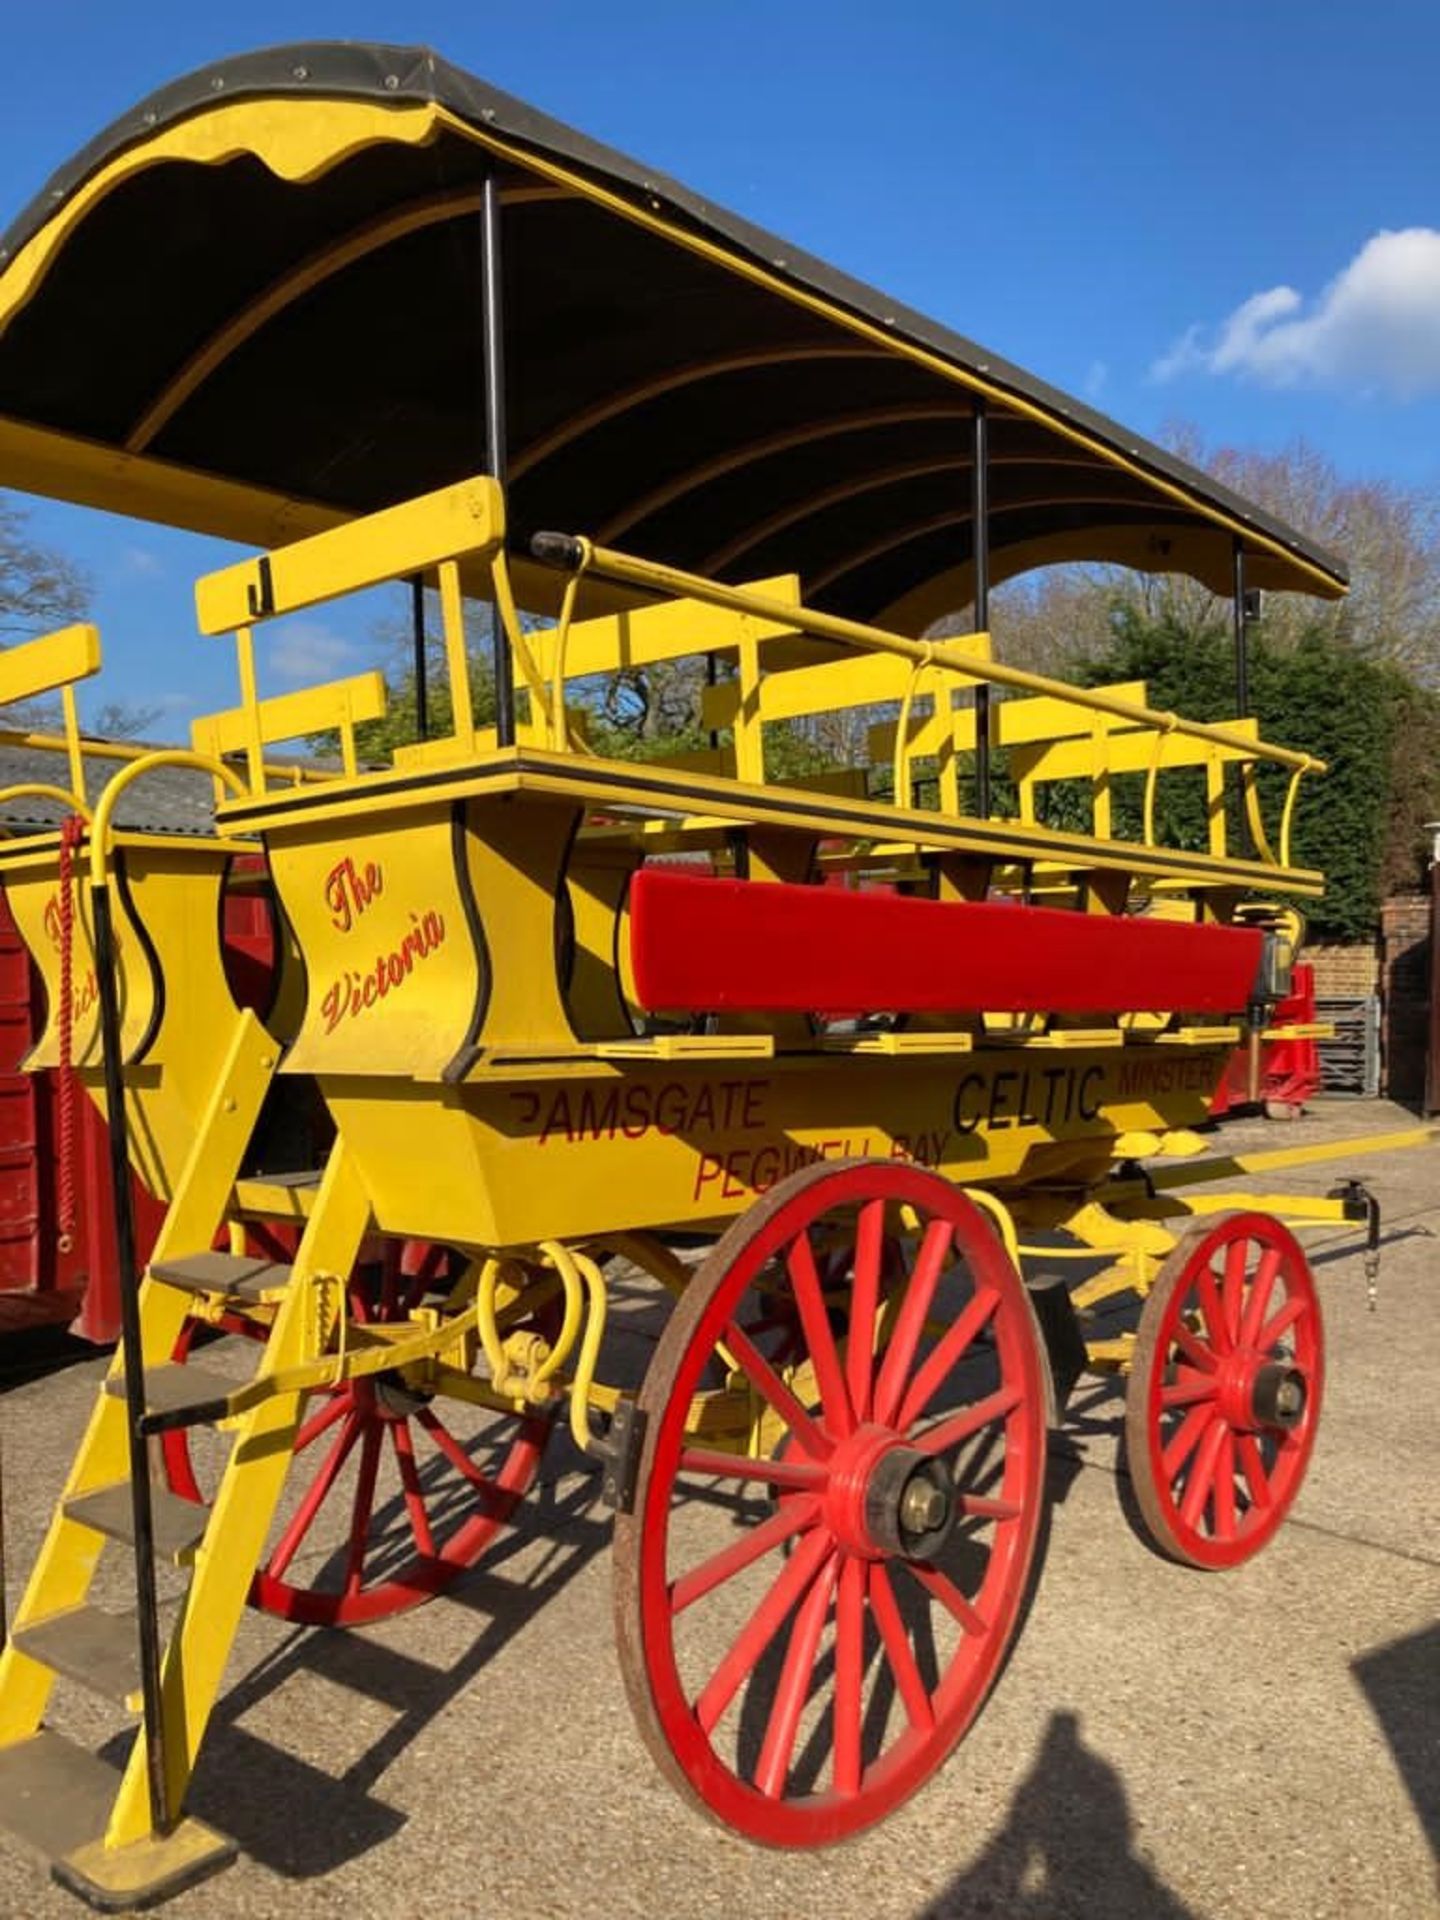 CHARABANC painted yellow and red with 21 wooden seats accessible via a rear staircase - Image 4 of 5